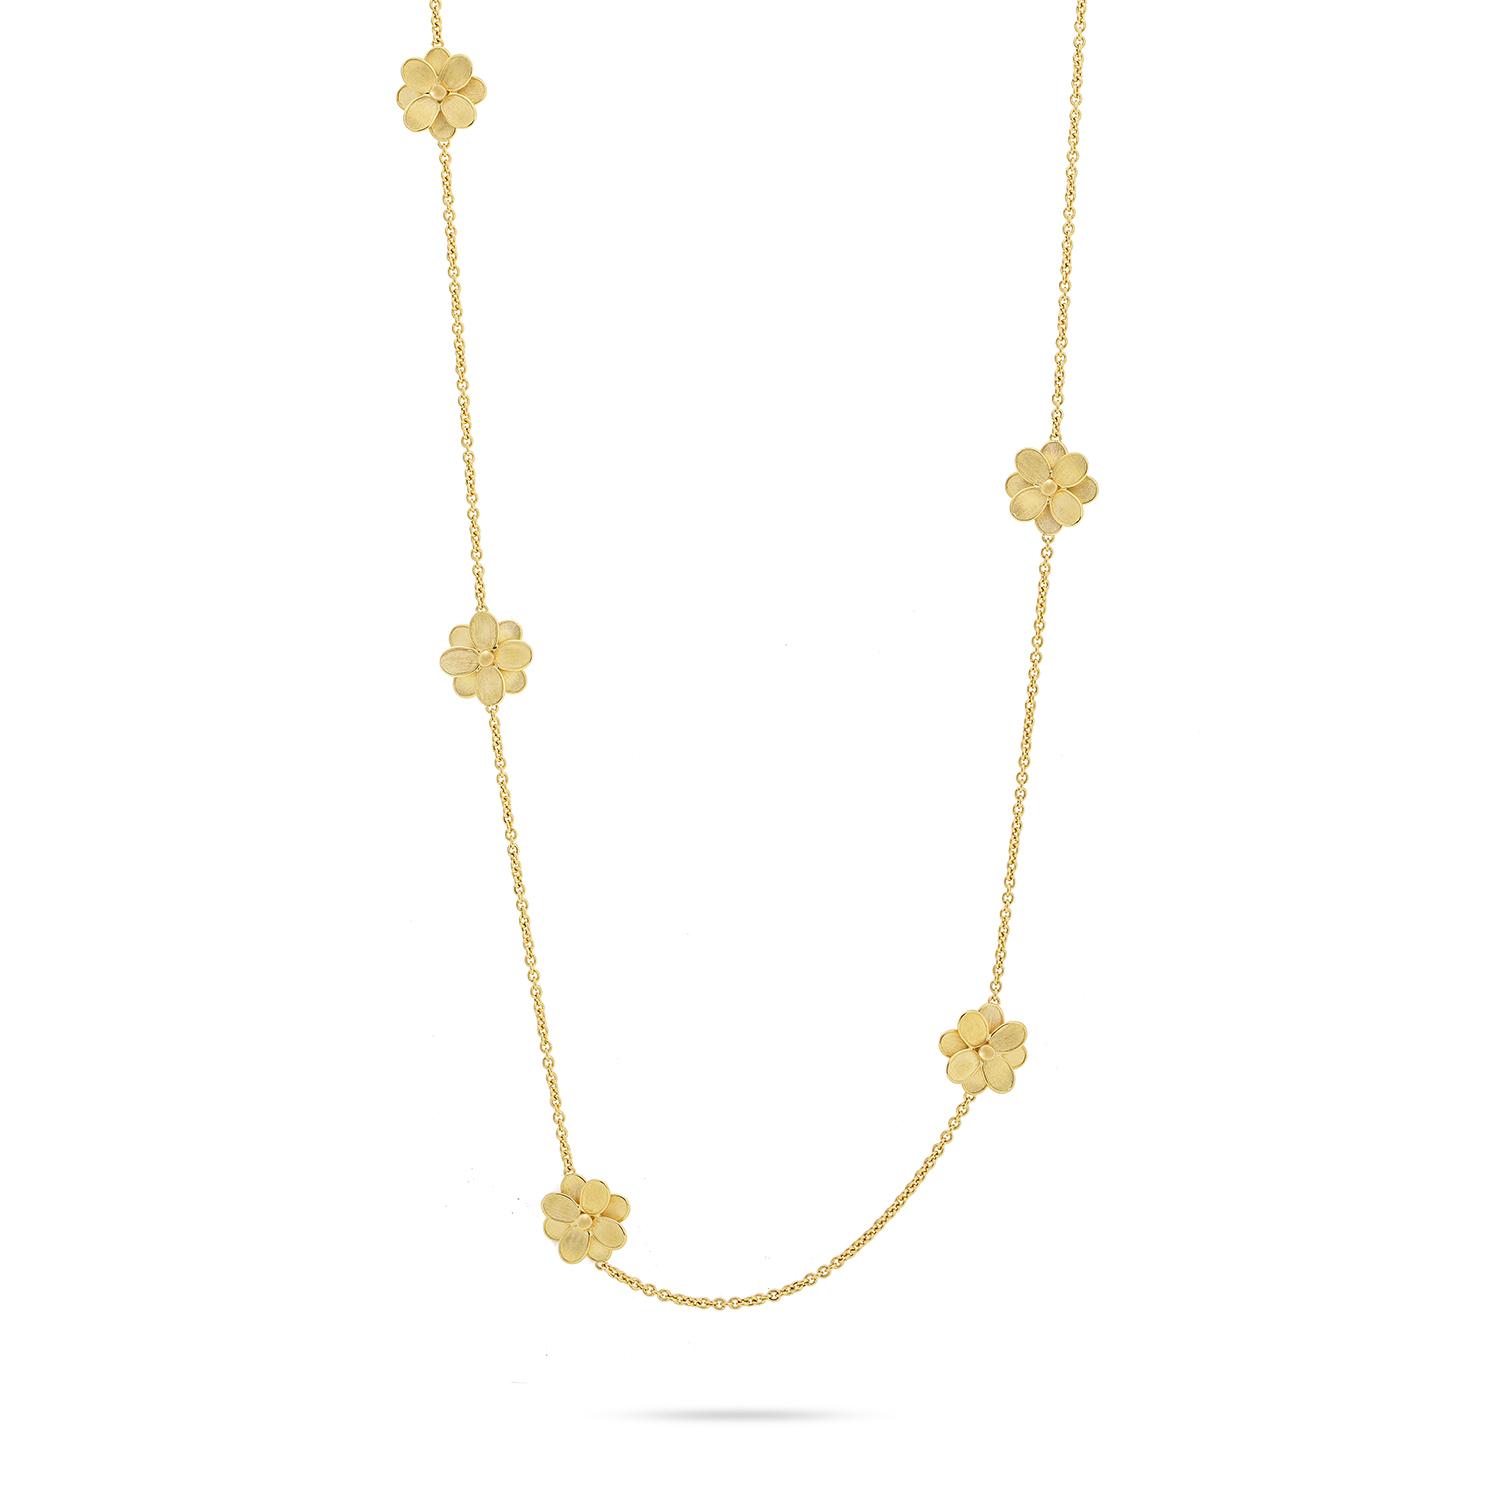 Marco Bicego Yellow Gold Lunaria Petali 36 inch Flower Station Necklace